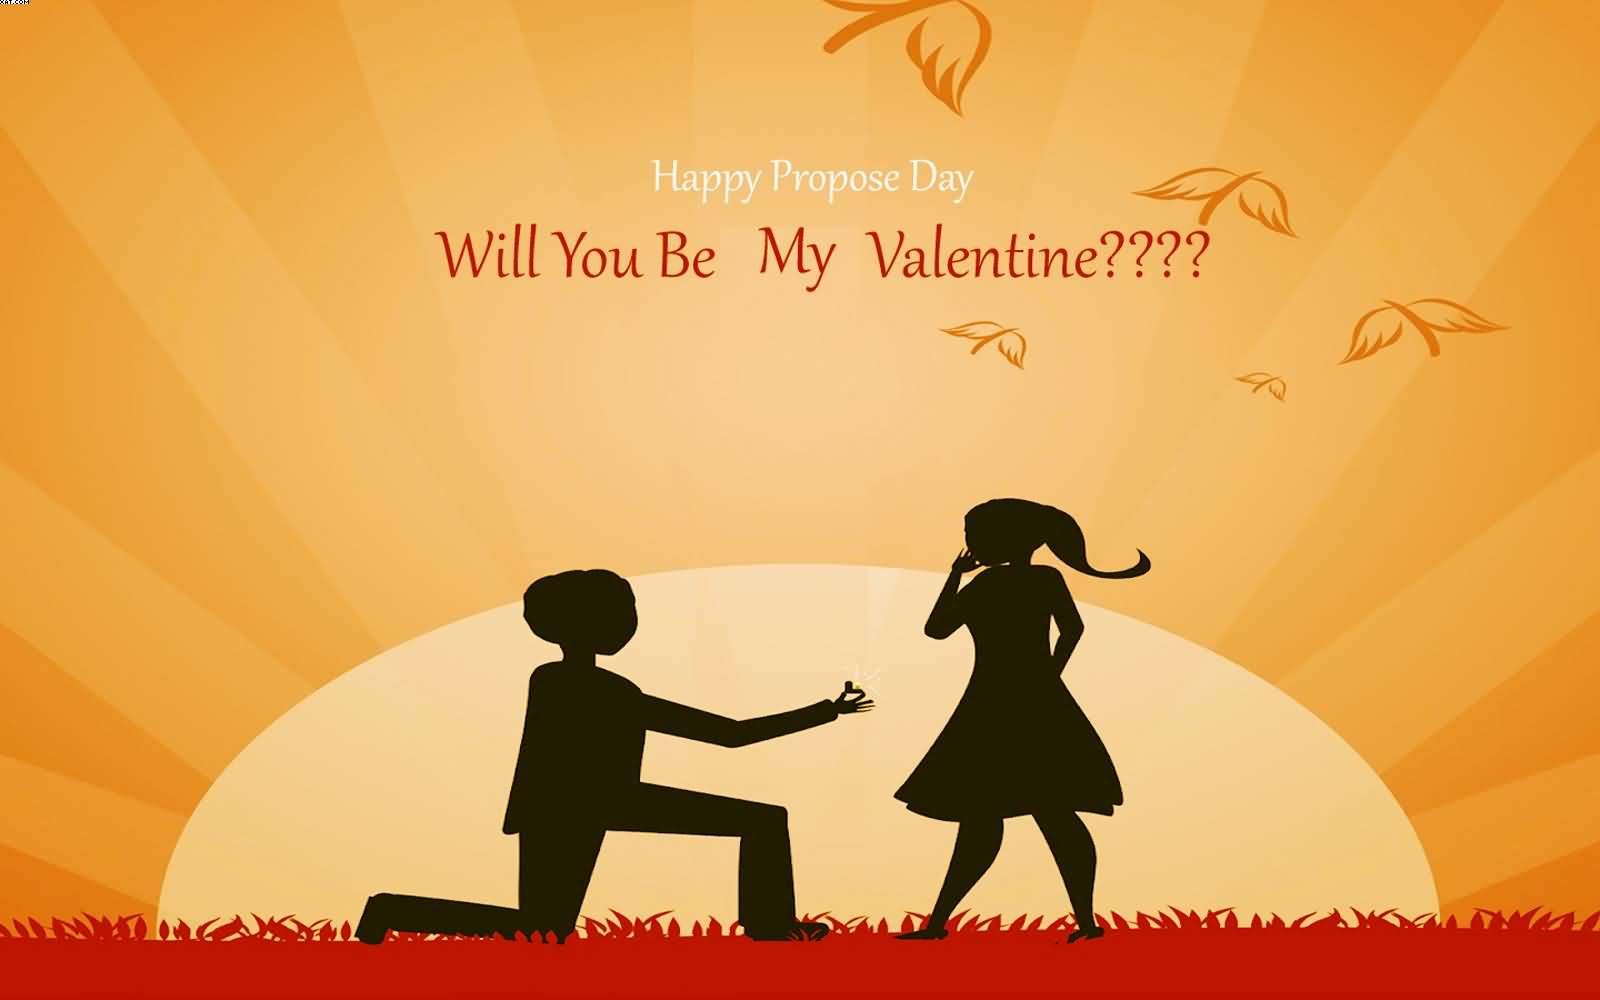 Boy propose to girl silhouette Happy Propose day wallpaper